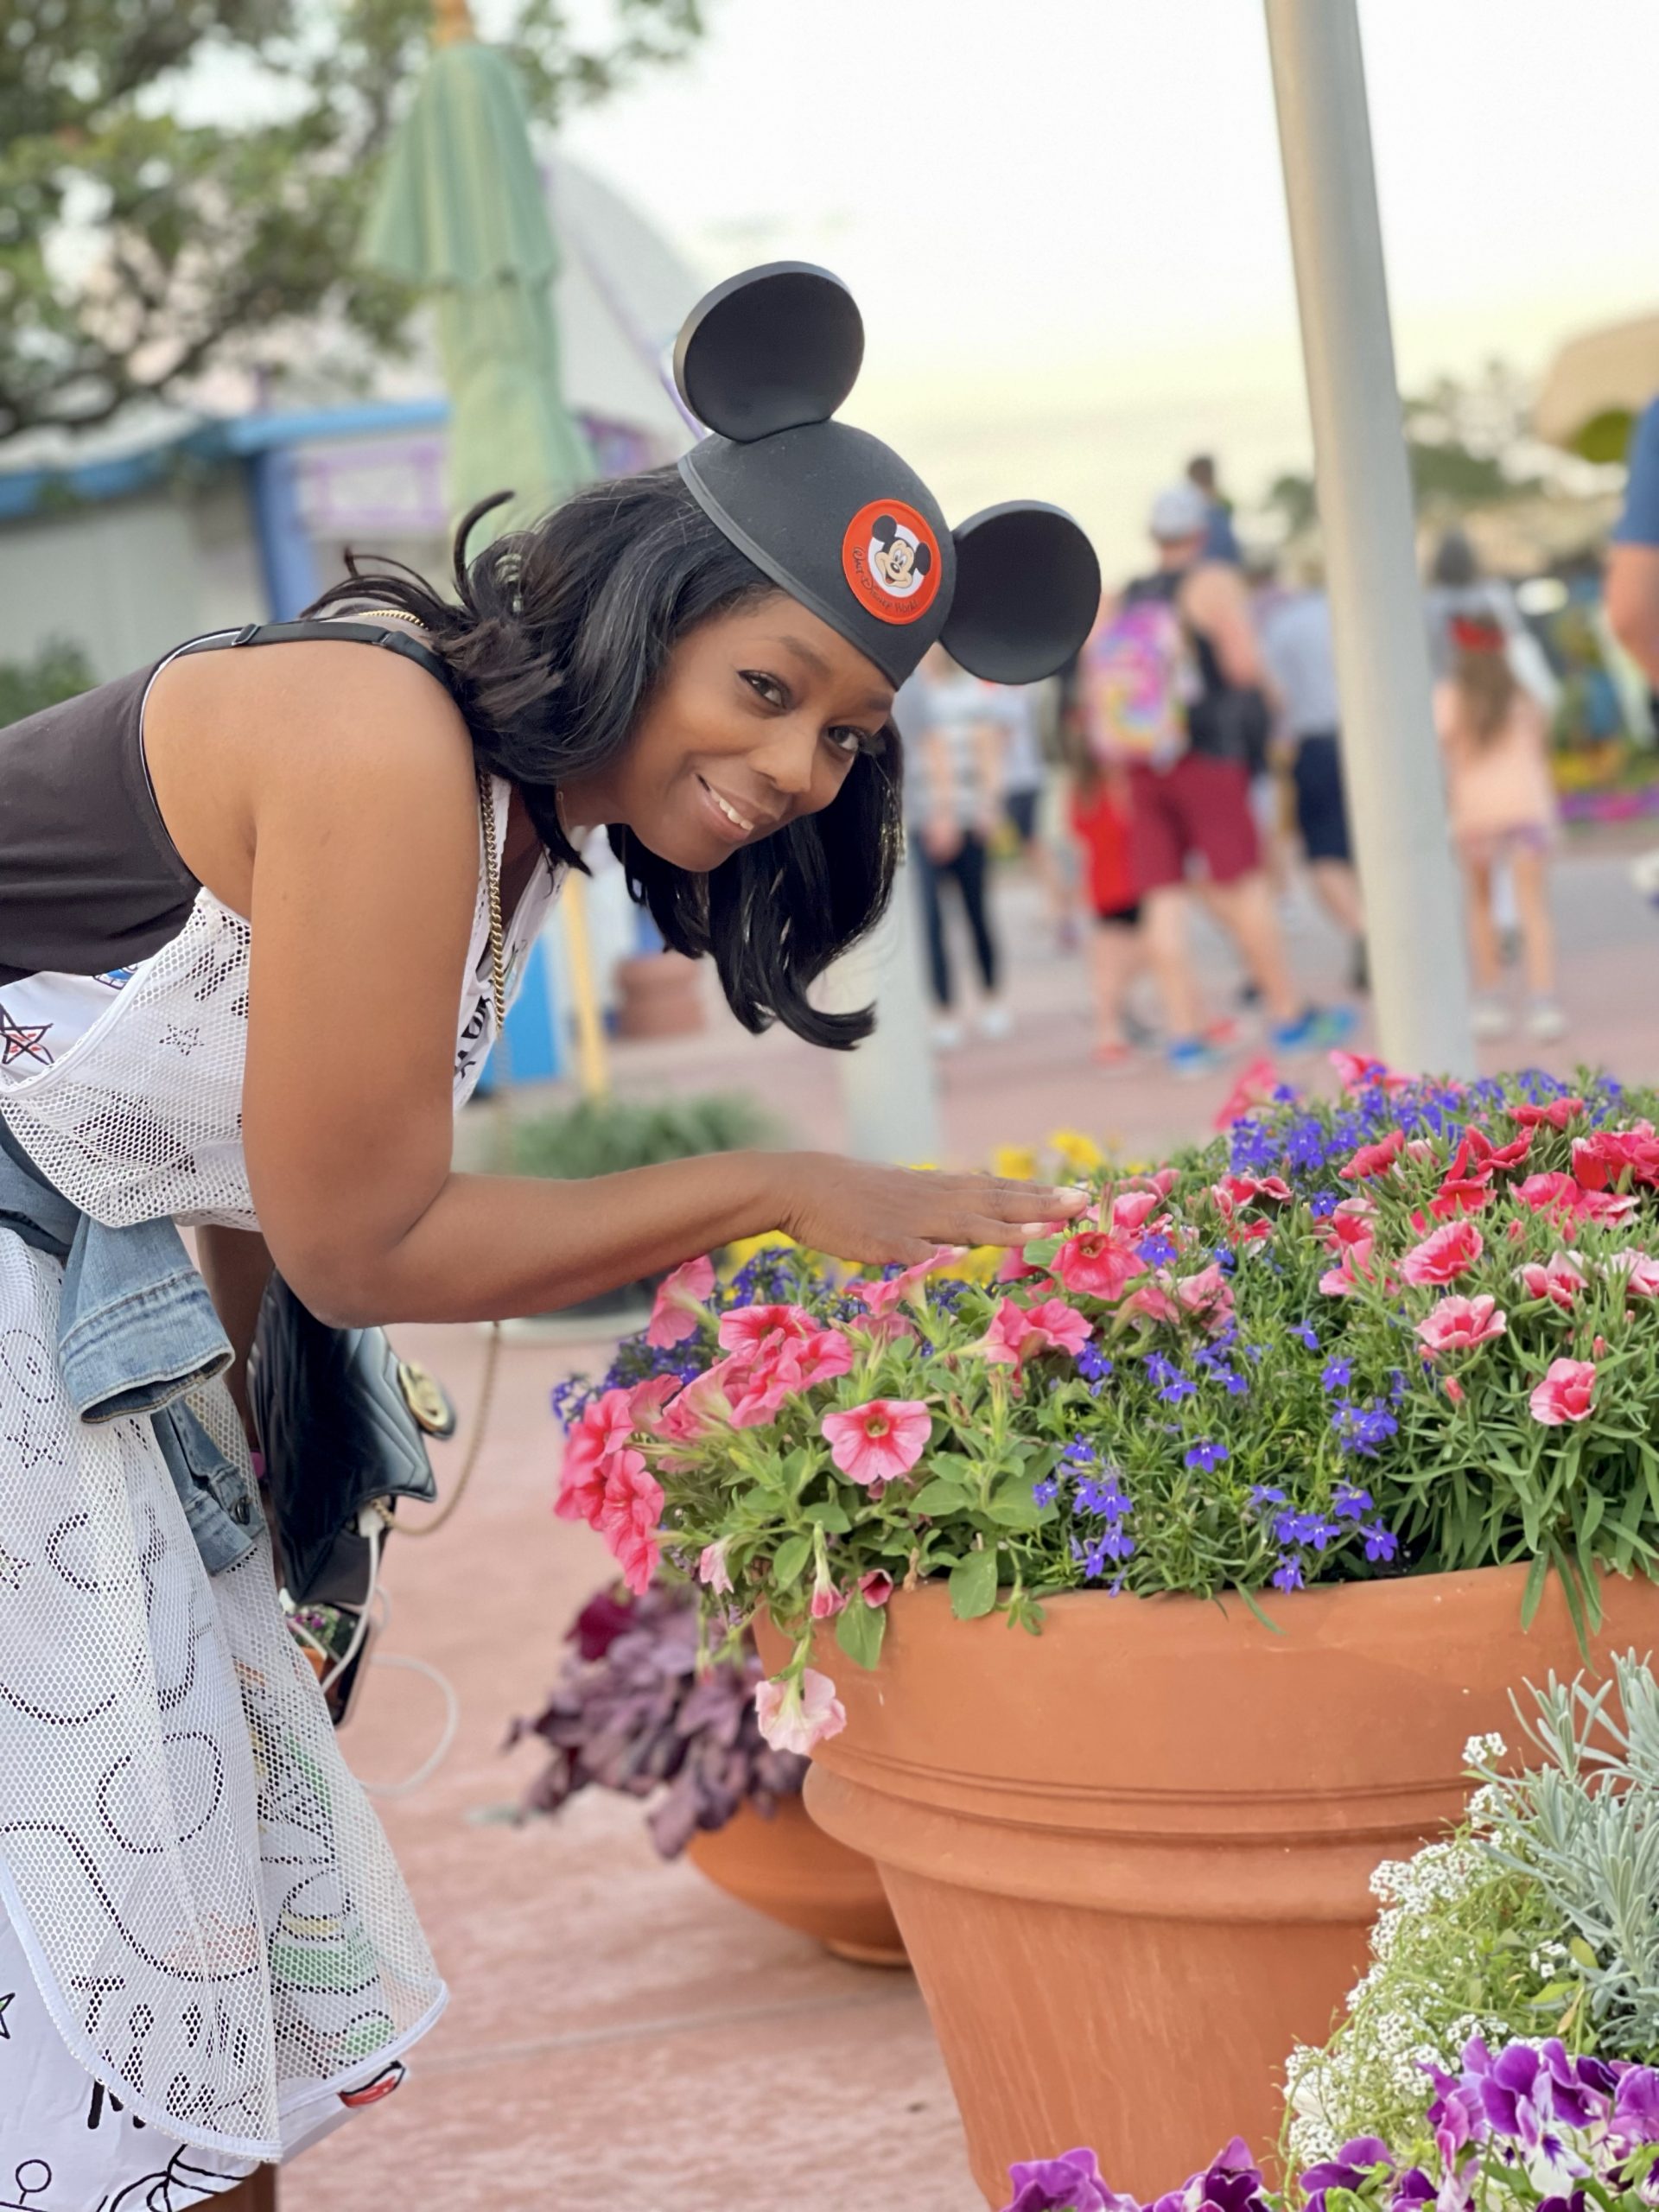 Five Things You’ll Love About ‘EPCOT International Flower & Garden Festival’